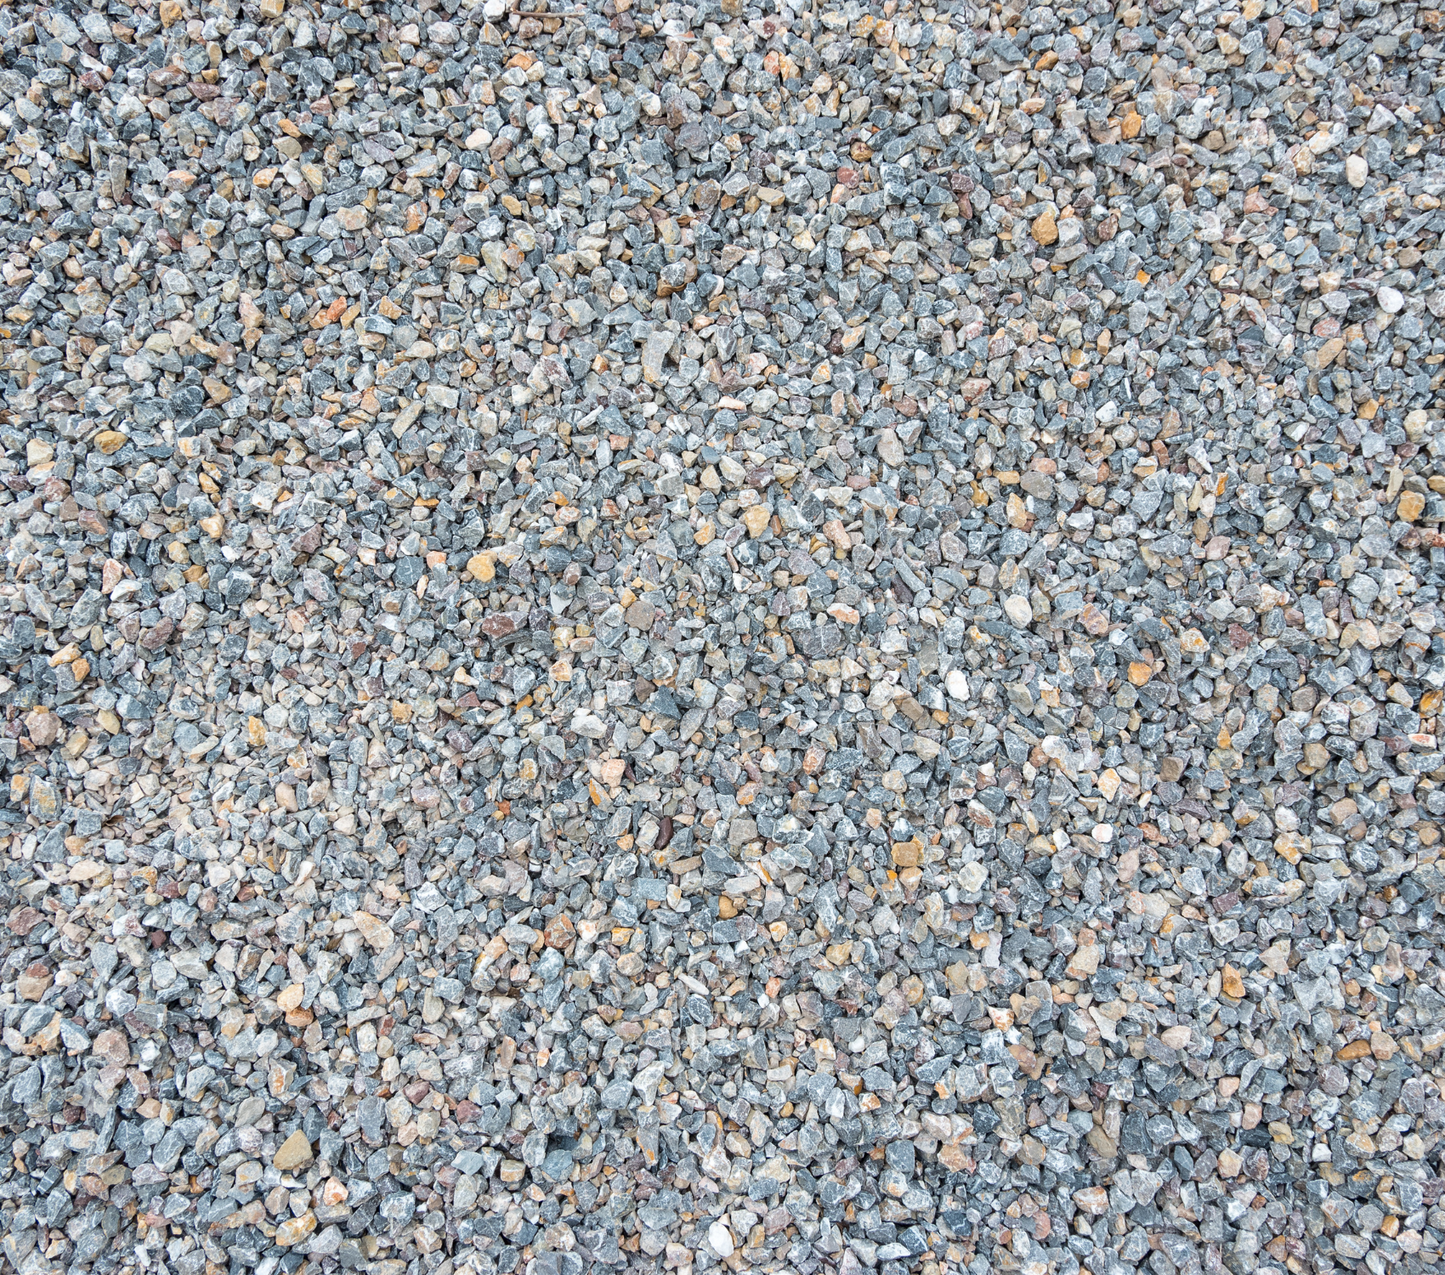 A close-up view of a gravel surface consisting of small, irregularly shaped stones in various shades of gray, with occasional hints of brown and tan, perfect for landscaping driveways features Brisks 14-20mm Silver Grey Granite Chippings.